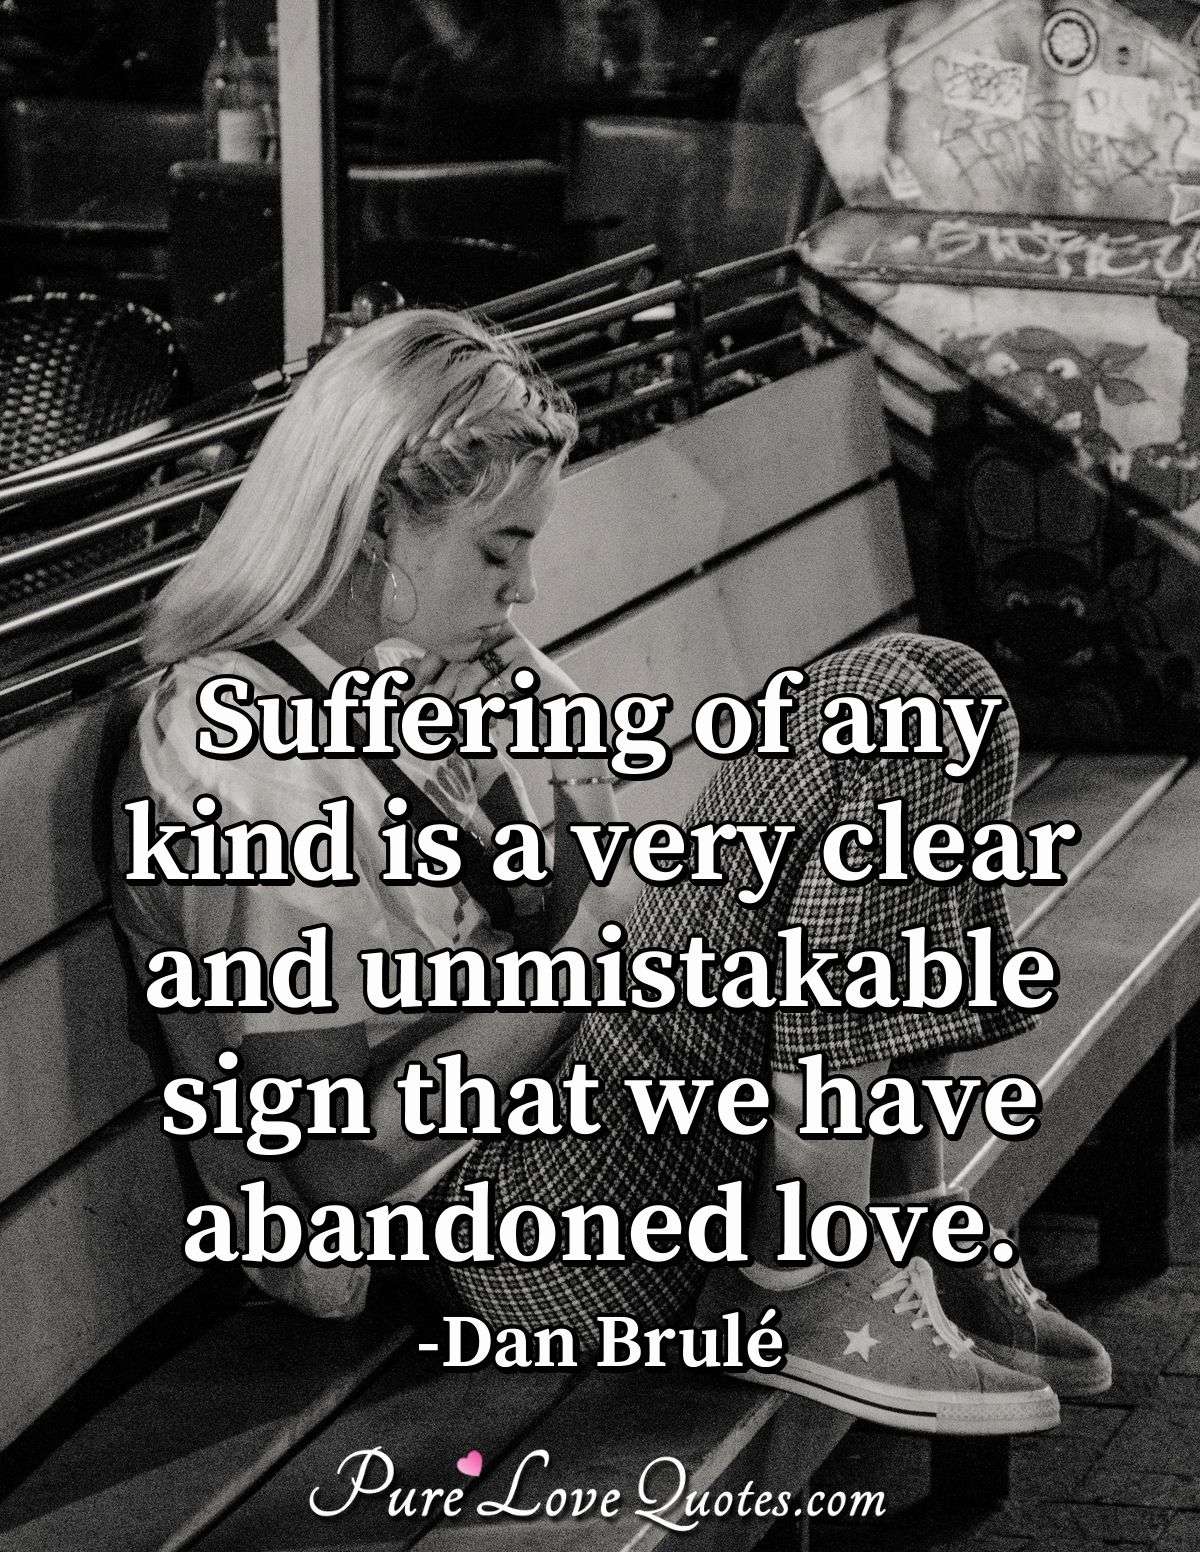 Suffering of any kind is a very clear and unmistakable sign that we have abandoned love. - Dan Brulé